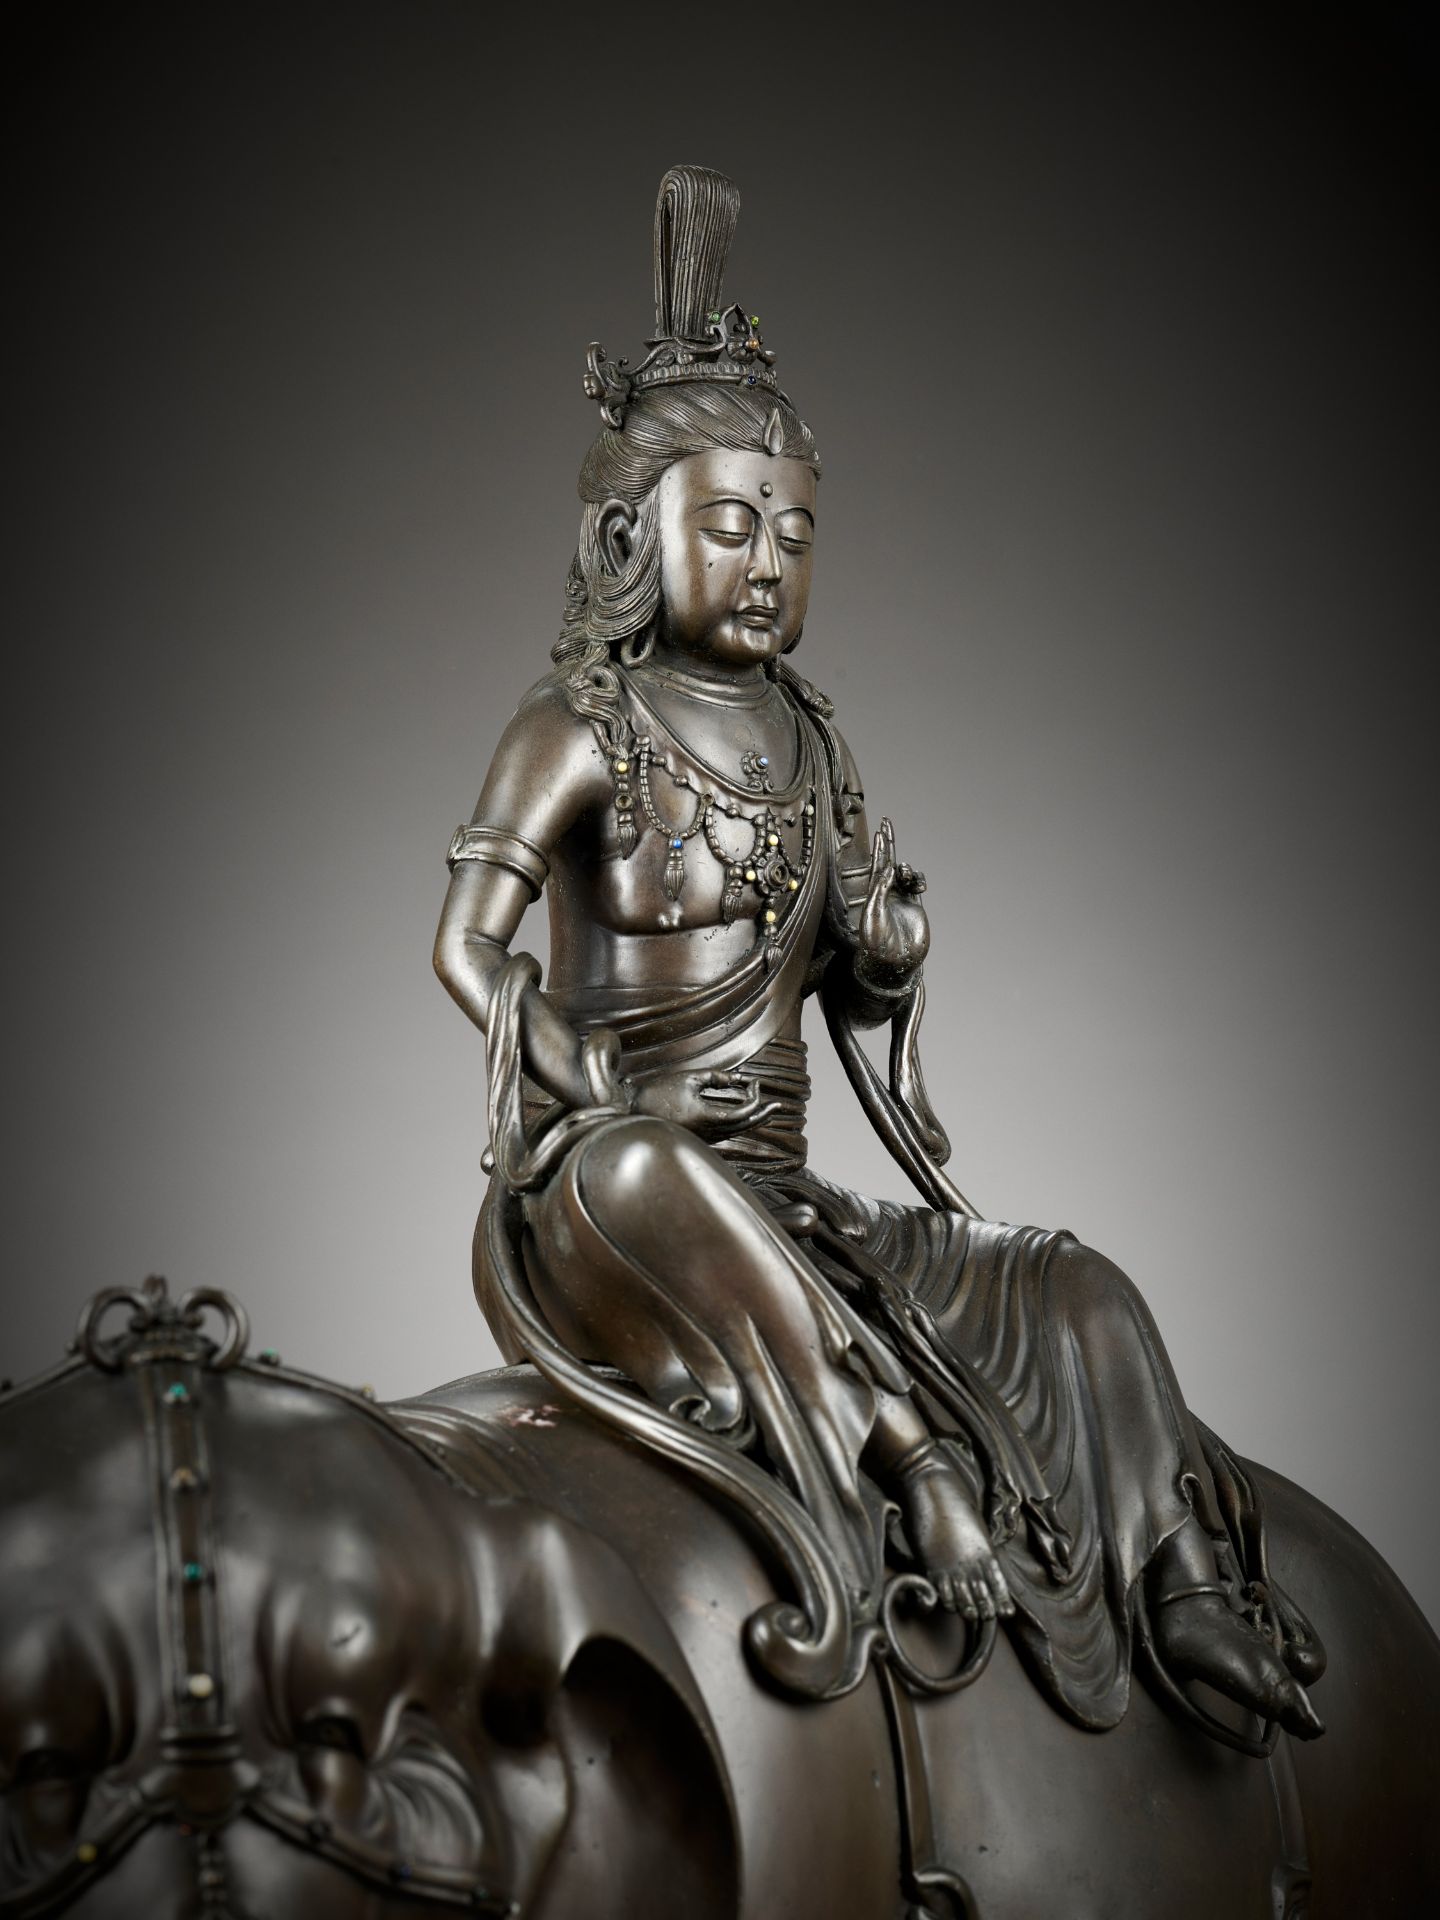 A UNIQUE MONUMENTAL BRONZE OF SAMANTABHADRA ON HIS ELEPHANT, SOLD AT THE 1901 GLASGOW EXHIBITION - Image 5 of 19